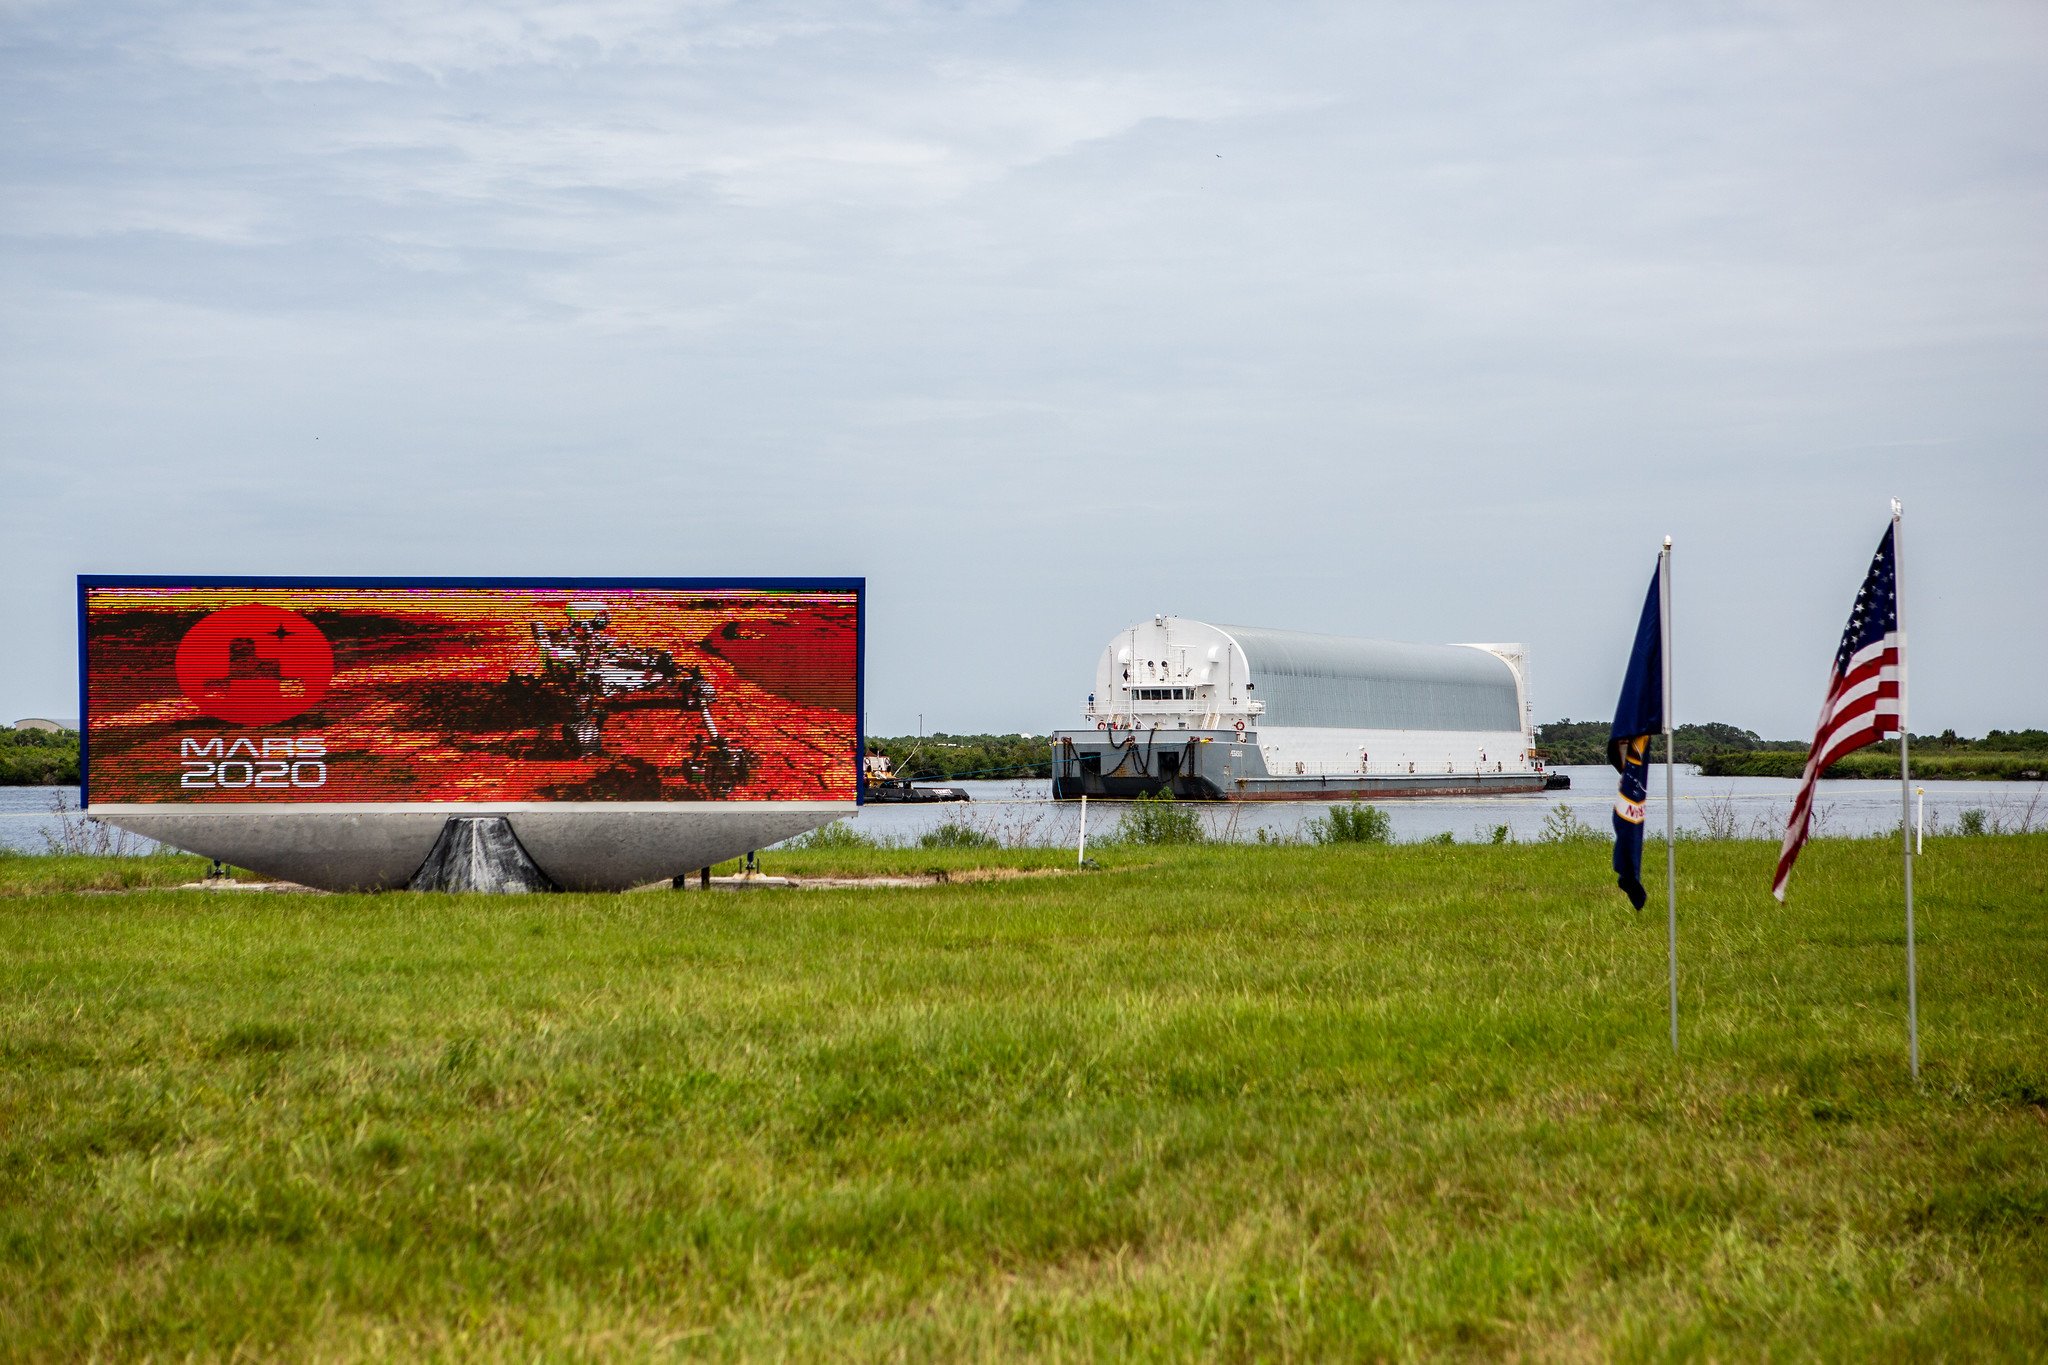 The launch vehicle stage adapter for the Space Launch System rocket arrives at Kennedy Space Center on July 29, 2020.